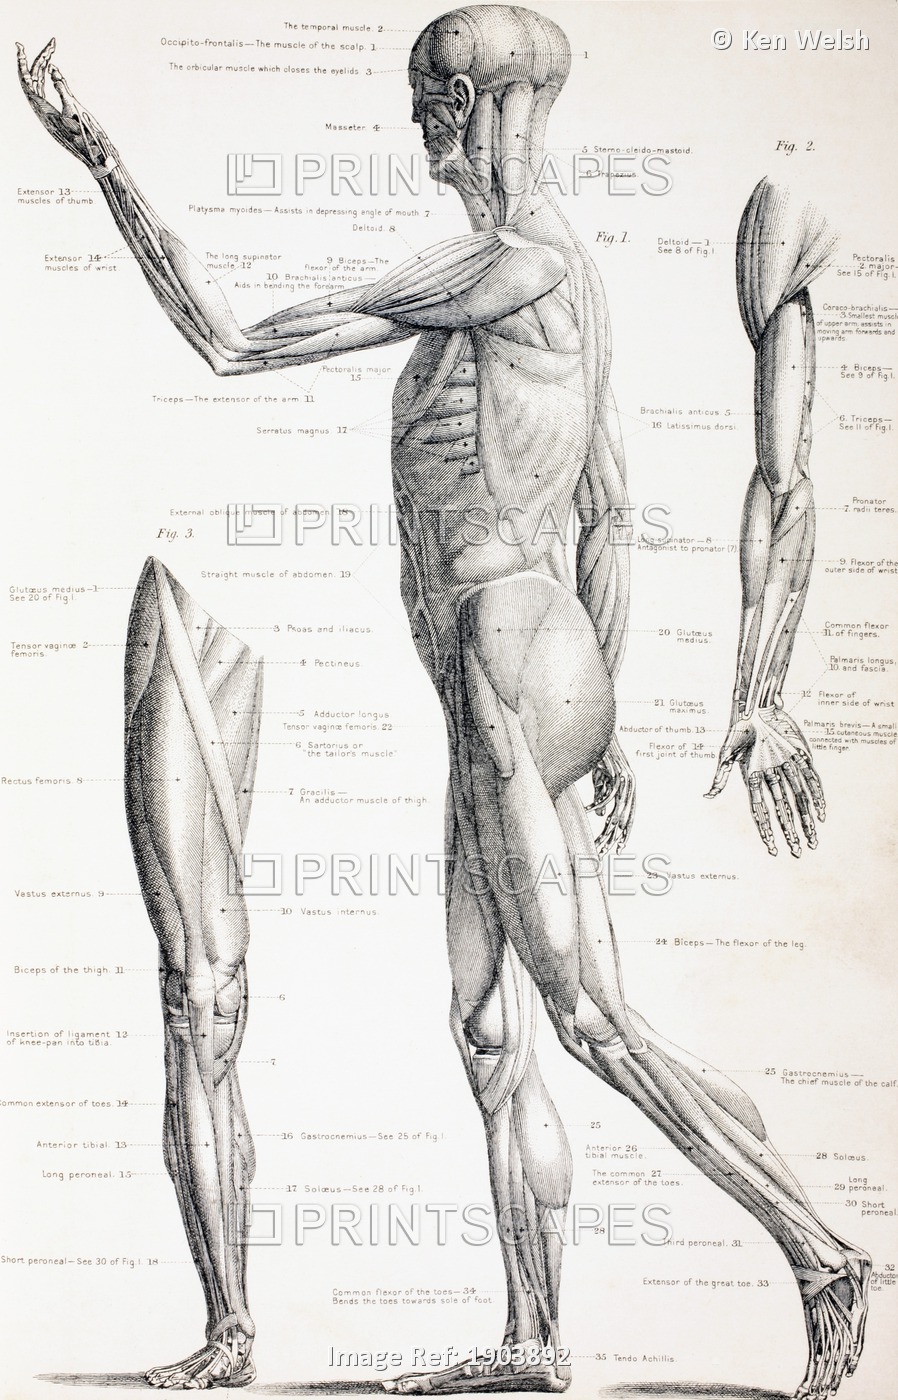 The Muscles Of The Human Body. From The Household Physician, Published Circa ...